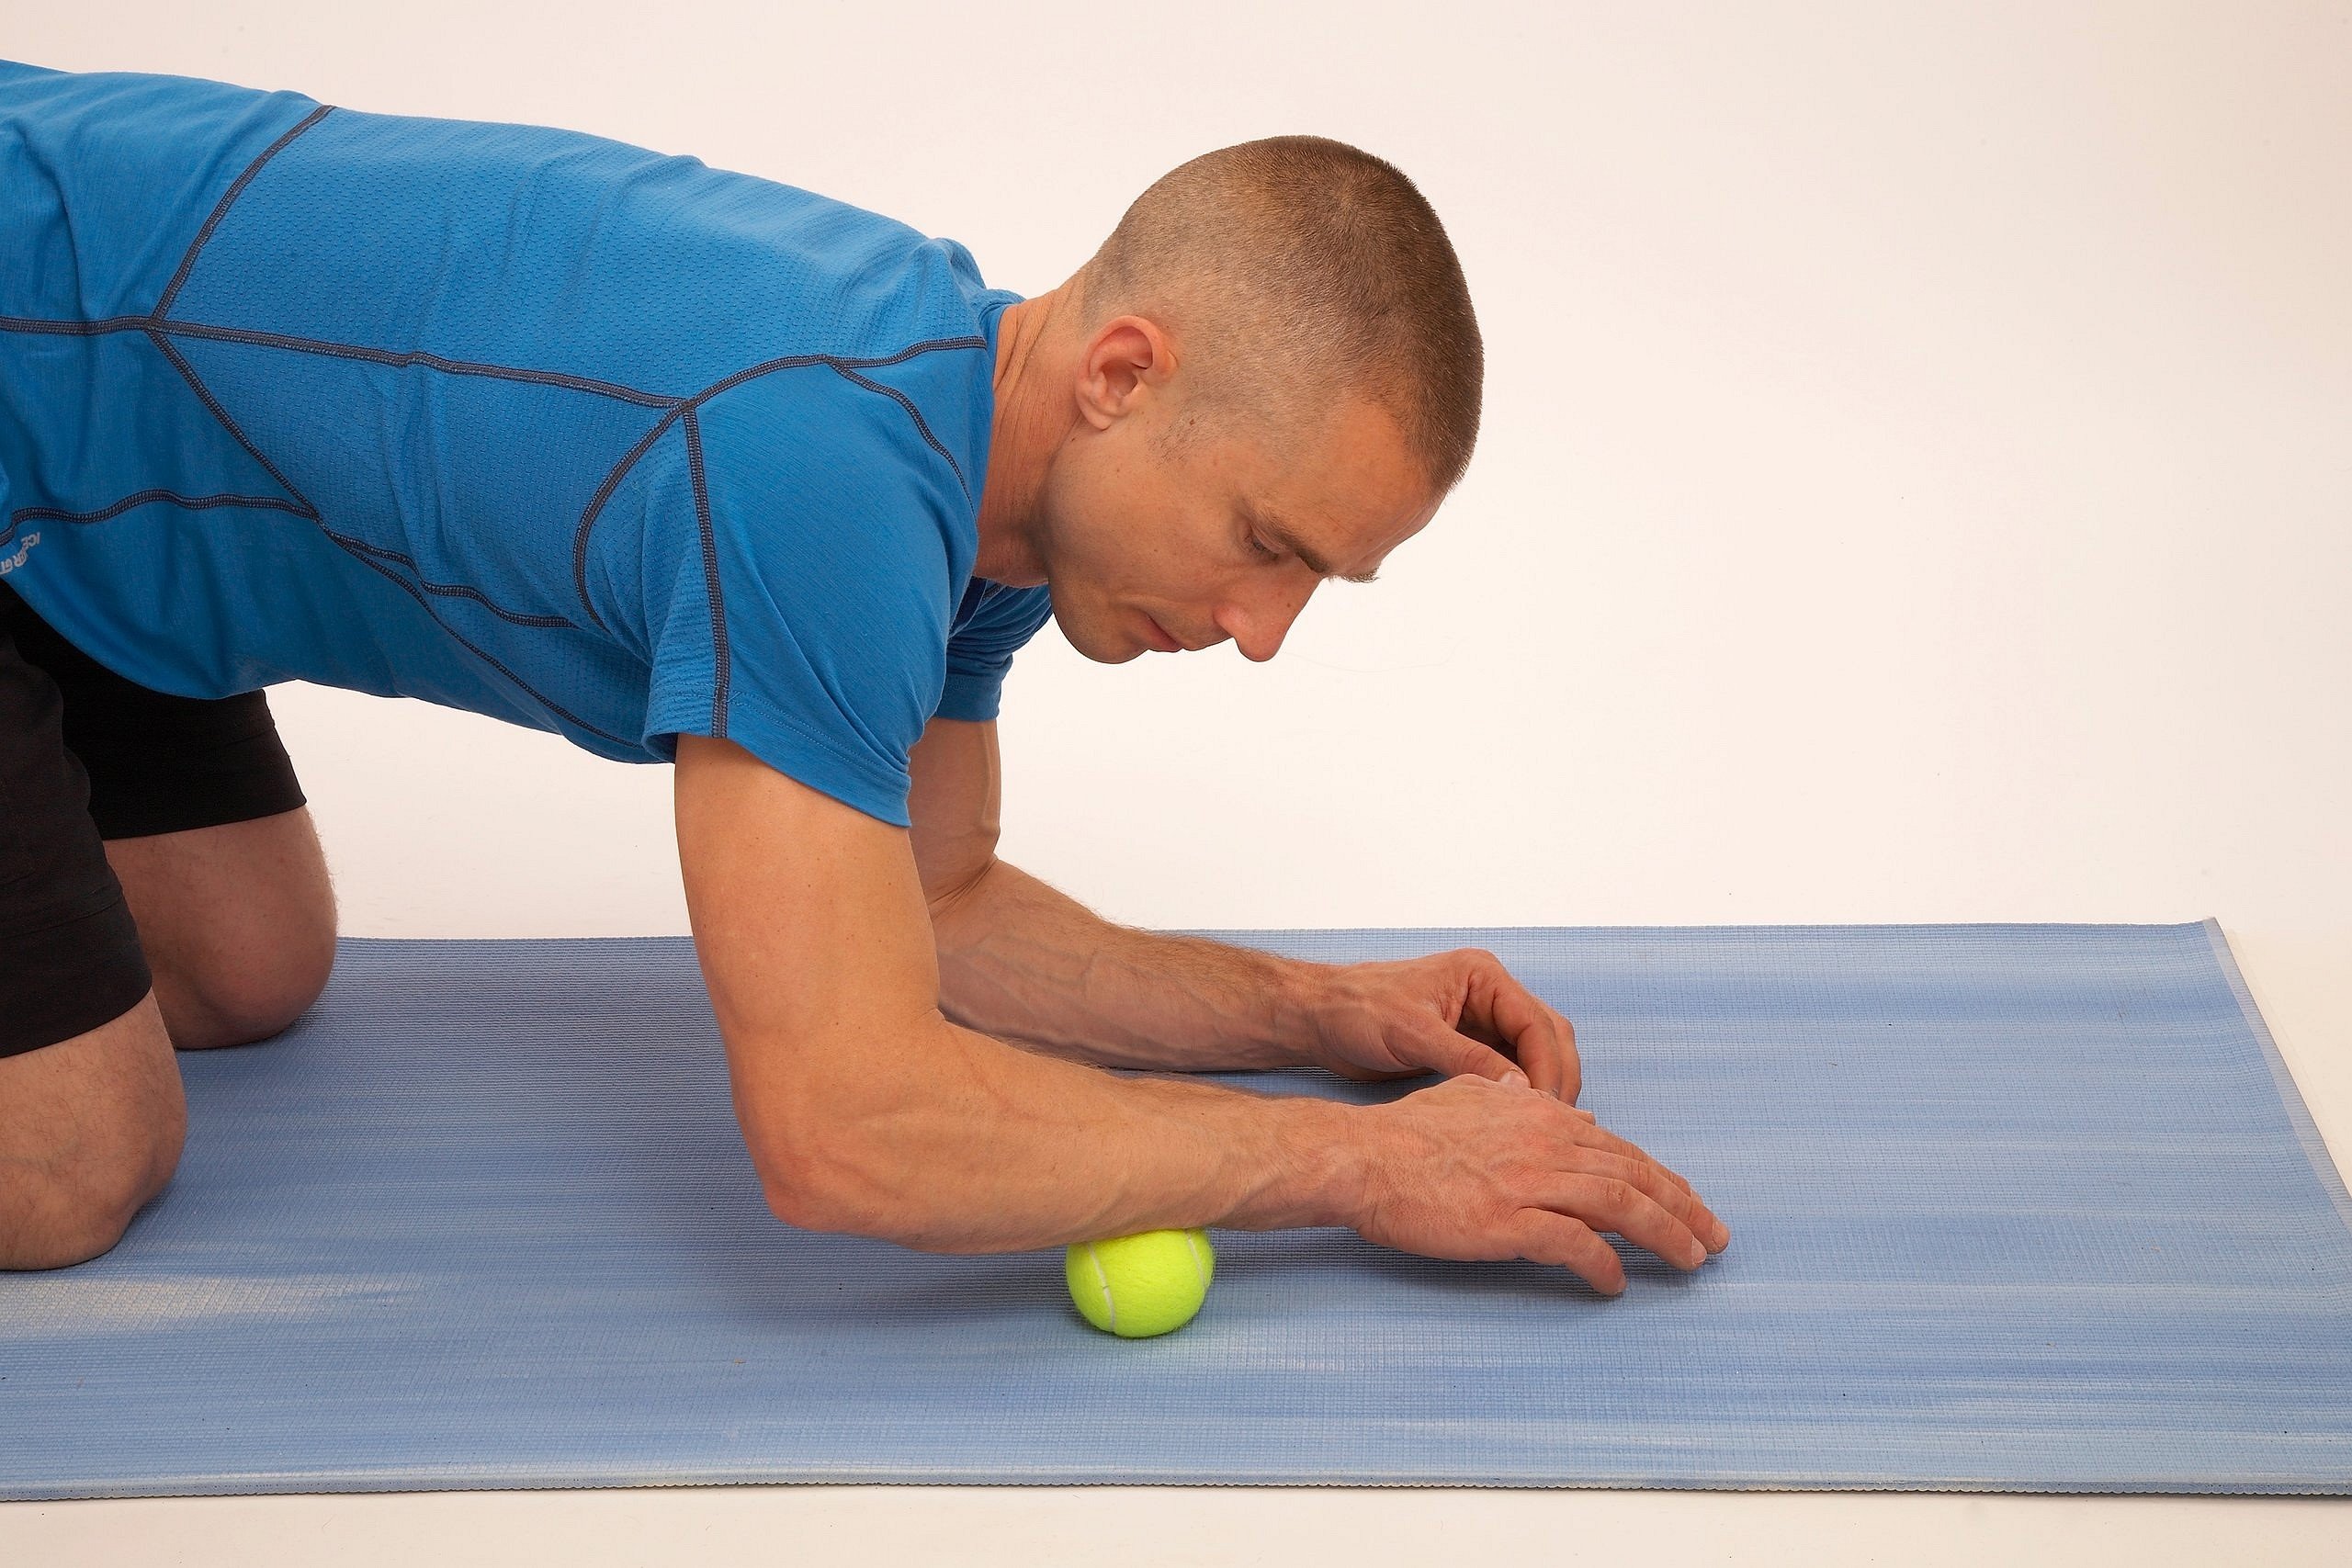 Tennis ball massage is a great supportive practice for reducing muscle tension in the forearms. Treat yourself after climbing o  © Steve Gorton